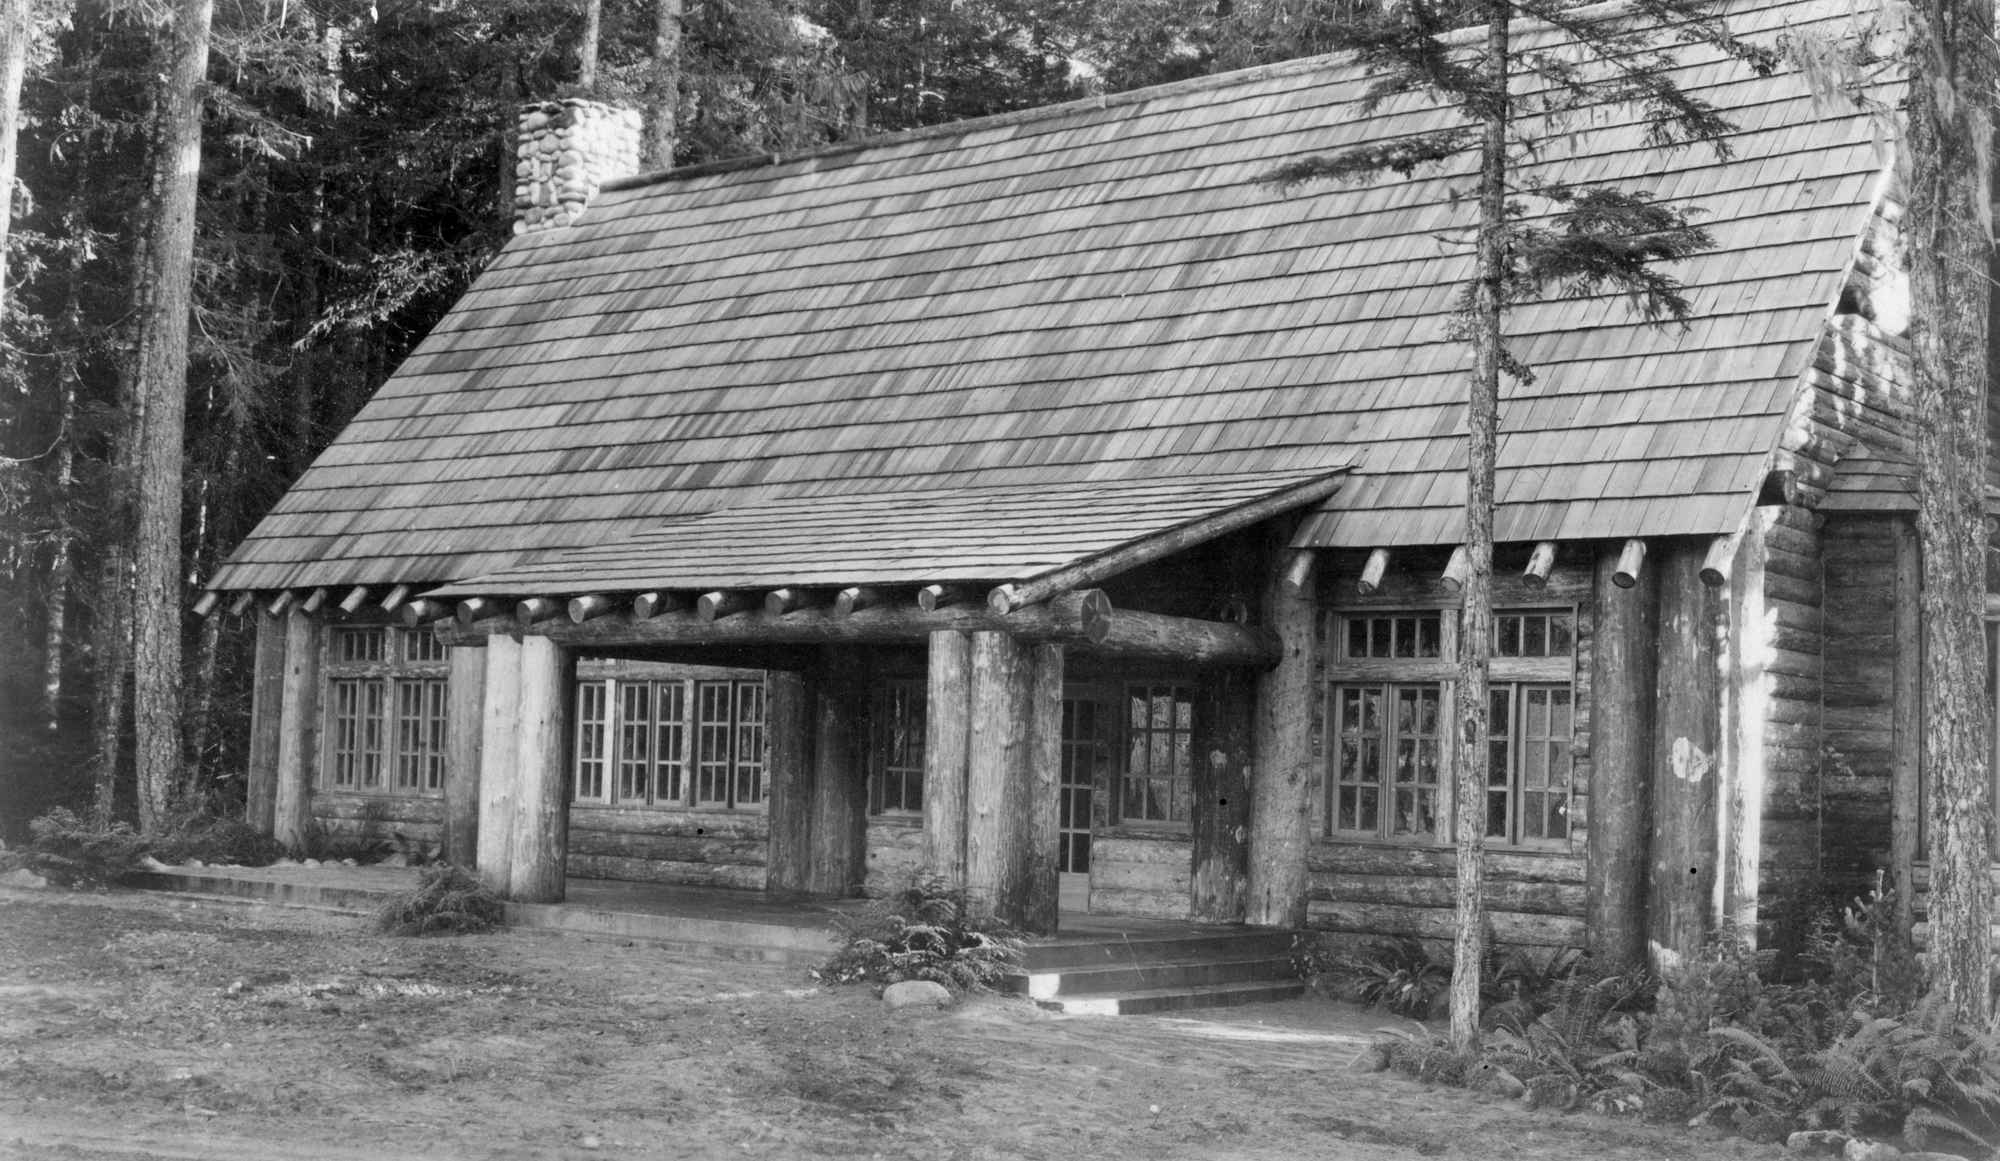 Black and white historic photo of a large log building in a forest with a steep shingle roof and a porch supported by log beams. Ferns ad plants grow around the edge of the building and porch. 